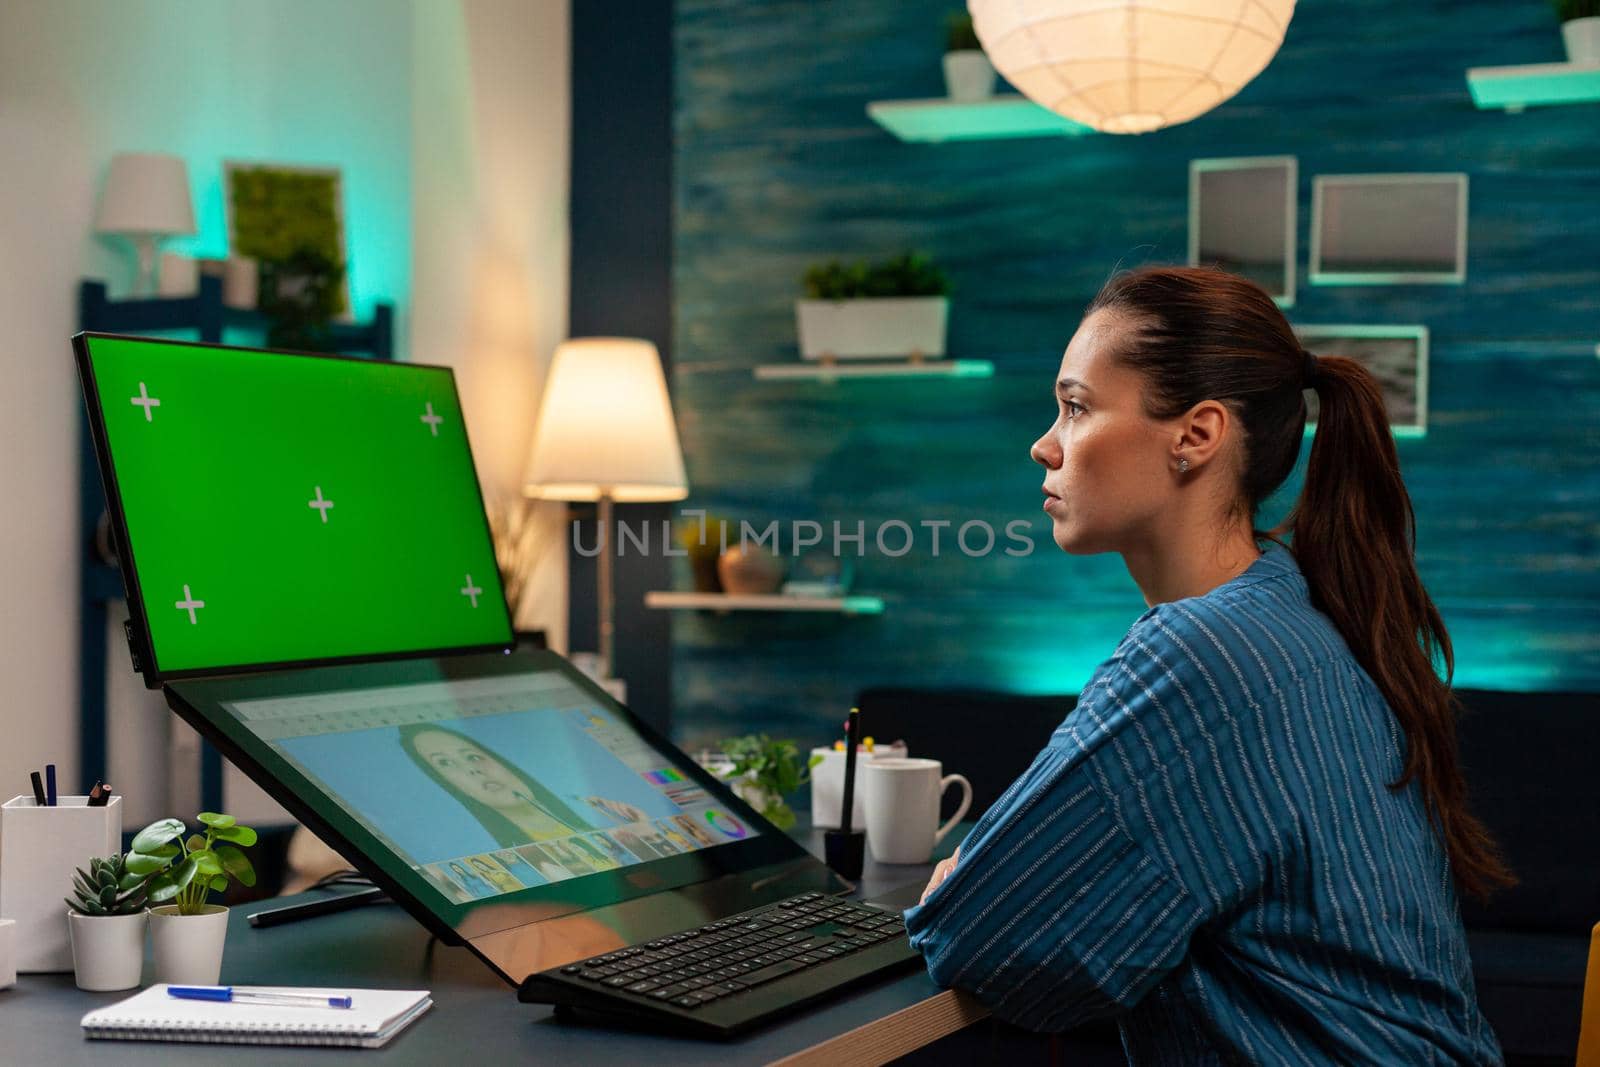 Studio editor worker looking at green screen on monitor and editing portrait picture with graphic tools. Woman photographer using chroma key mockup template for digital background display